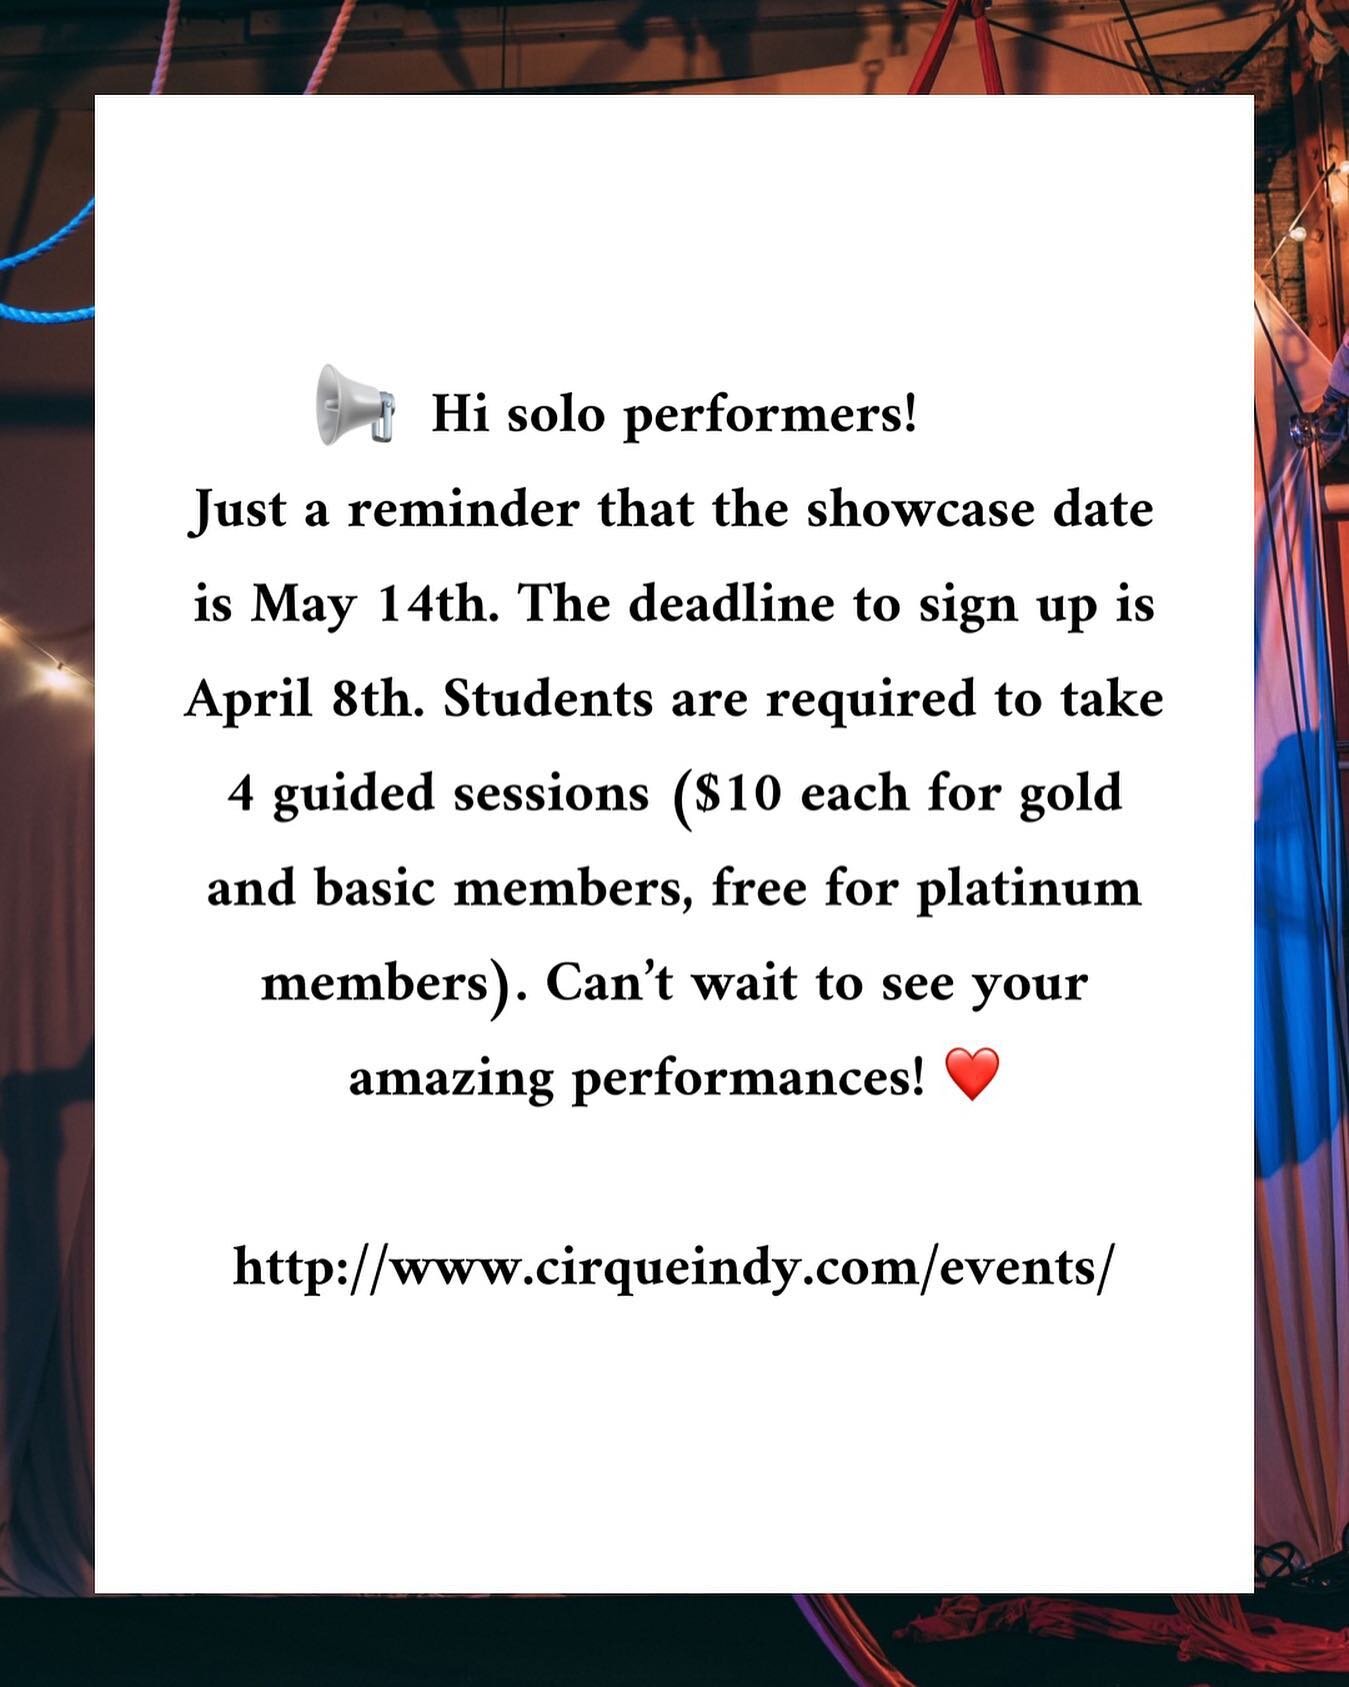 Hi solo performers! Just a reminder that the showcase date is May 14th. The deadline to sign up is April 8th. Students are required to take 4 guided sessions ($10 each for gold and basic members, free for platinum members). Can&rsquo;t wait to see yo